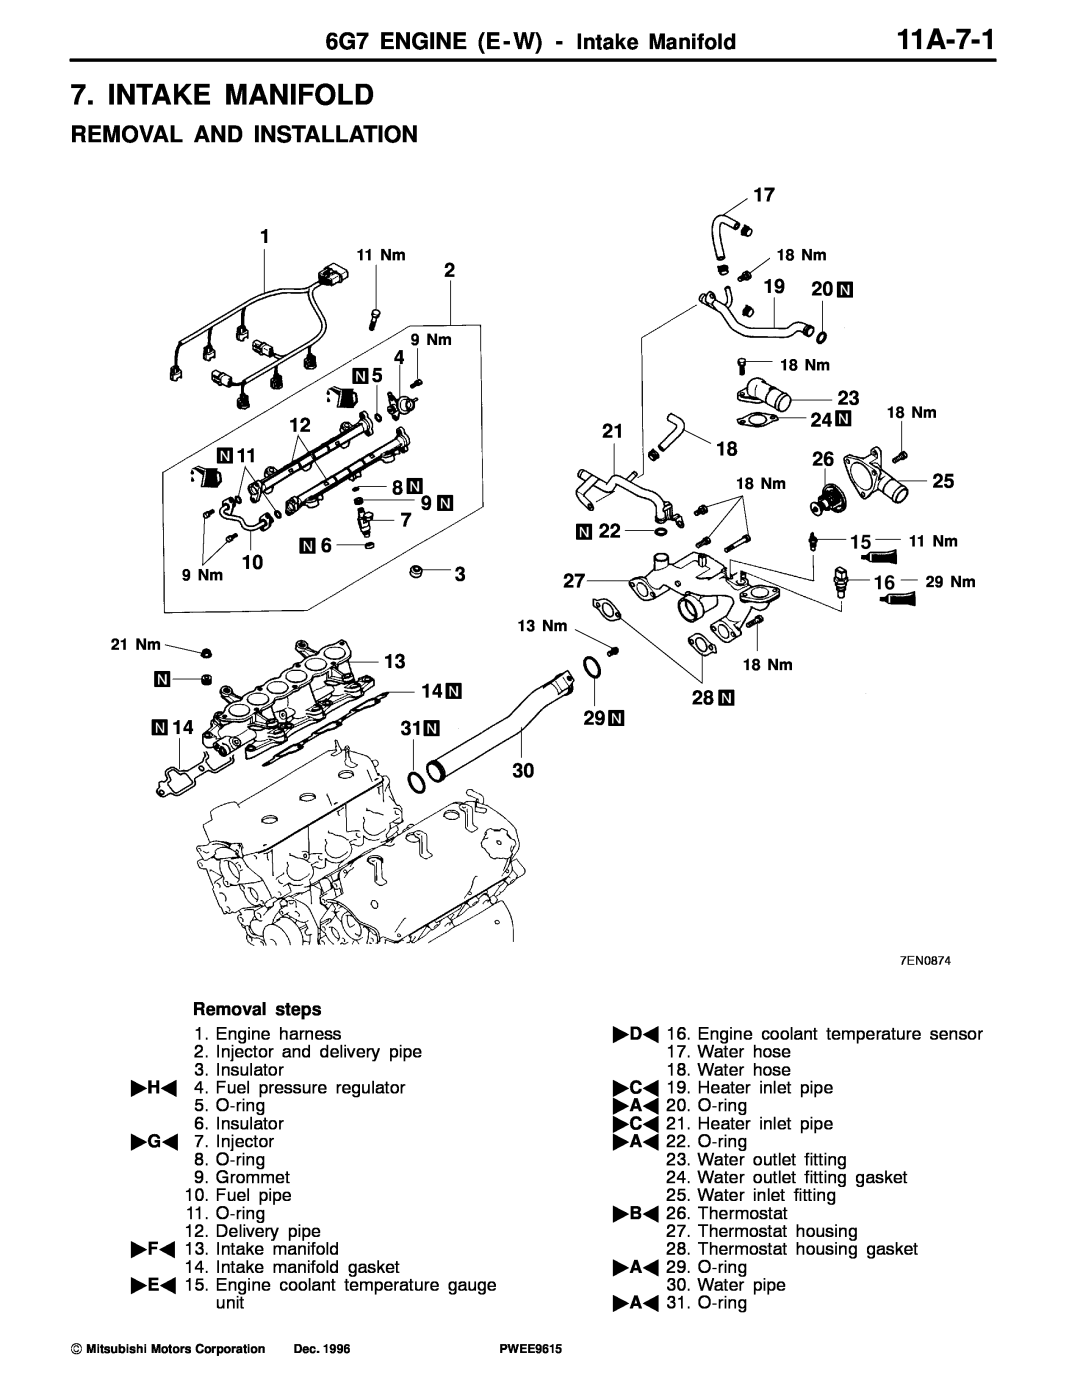 Mitsubishi specifications 11A-7-1, 6G7 ENGINE E - W - Intake Manifold, Removal And Installation 